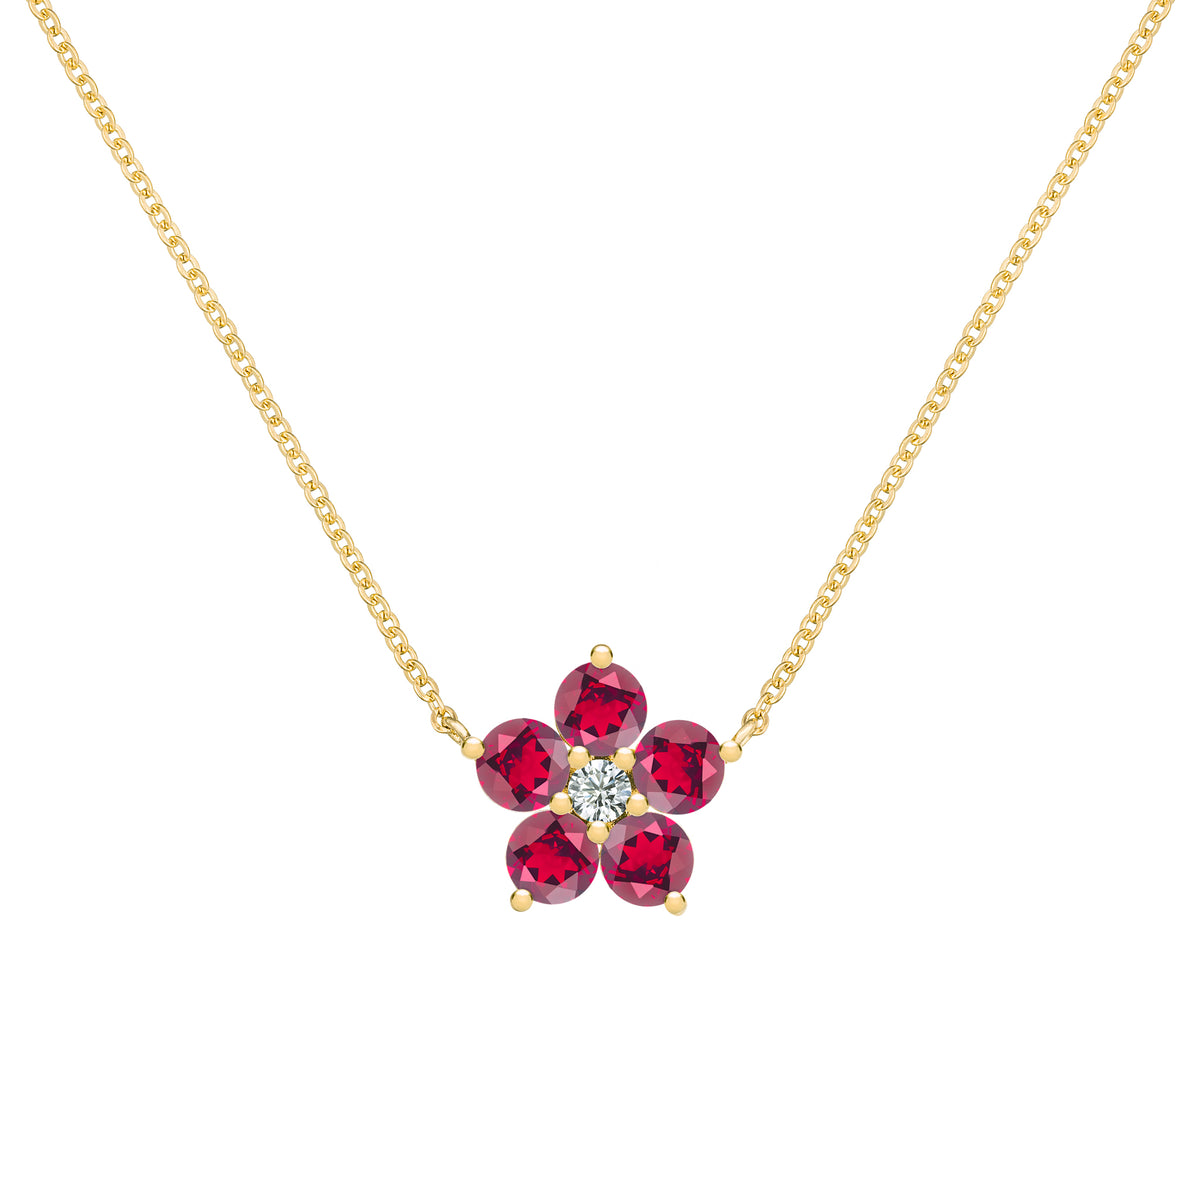 Greenwich Flower Pink Tourmaline & Diamond Necklace in 14K Yellow Gold (October), Small (16)